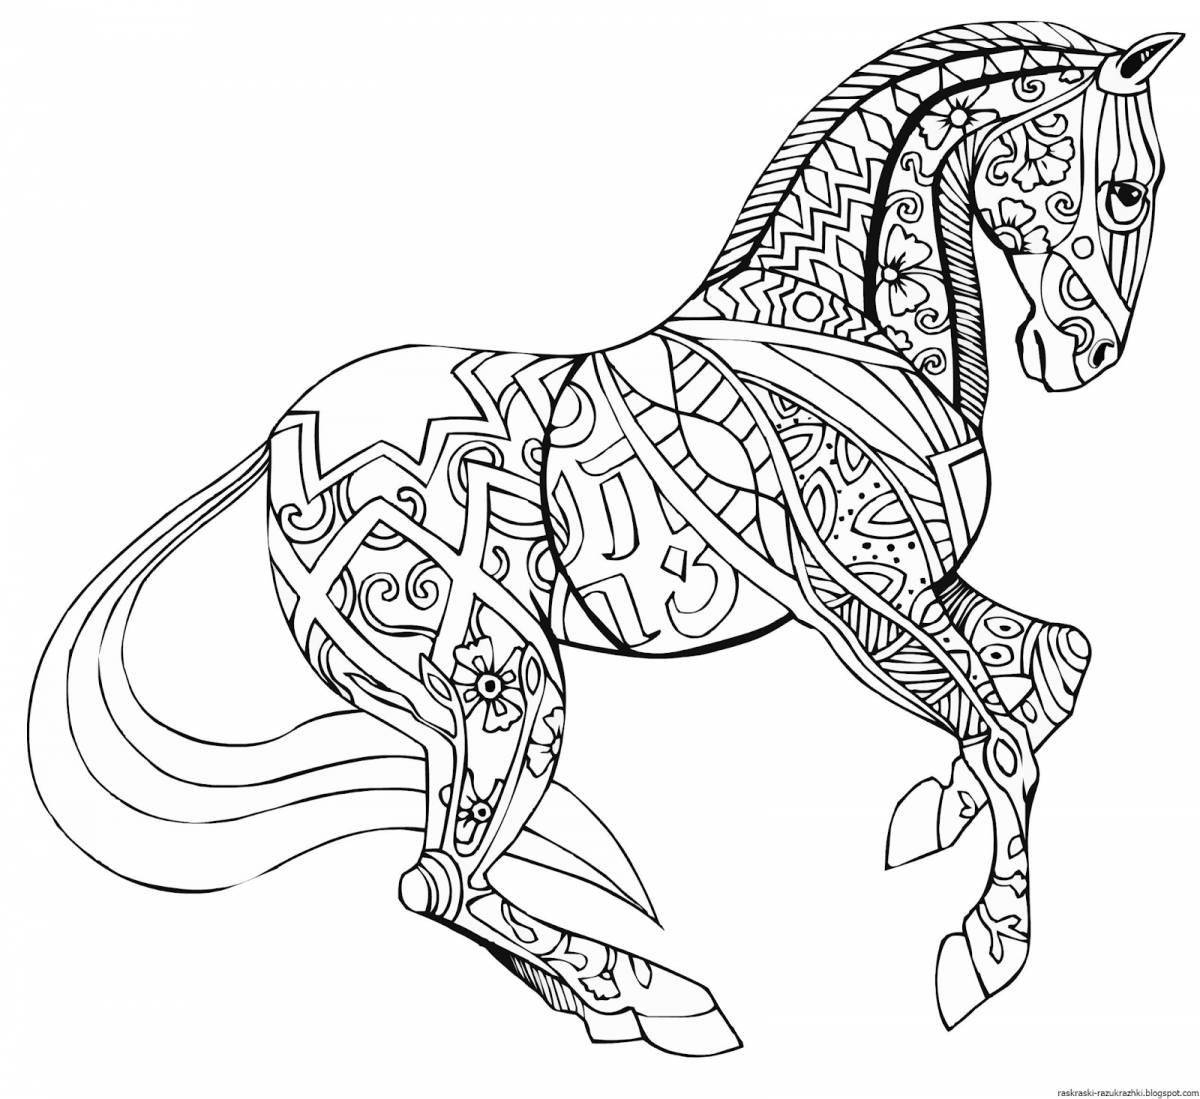 Brilliant coloring page among